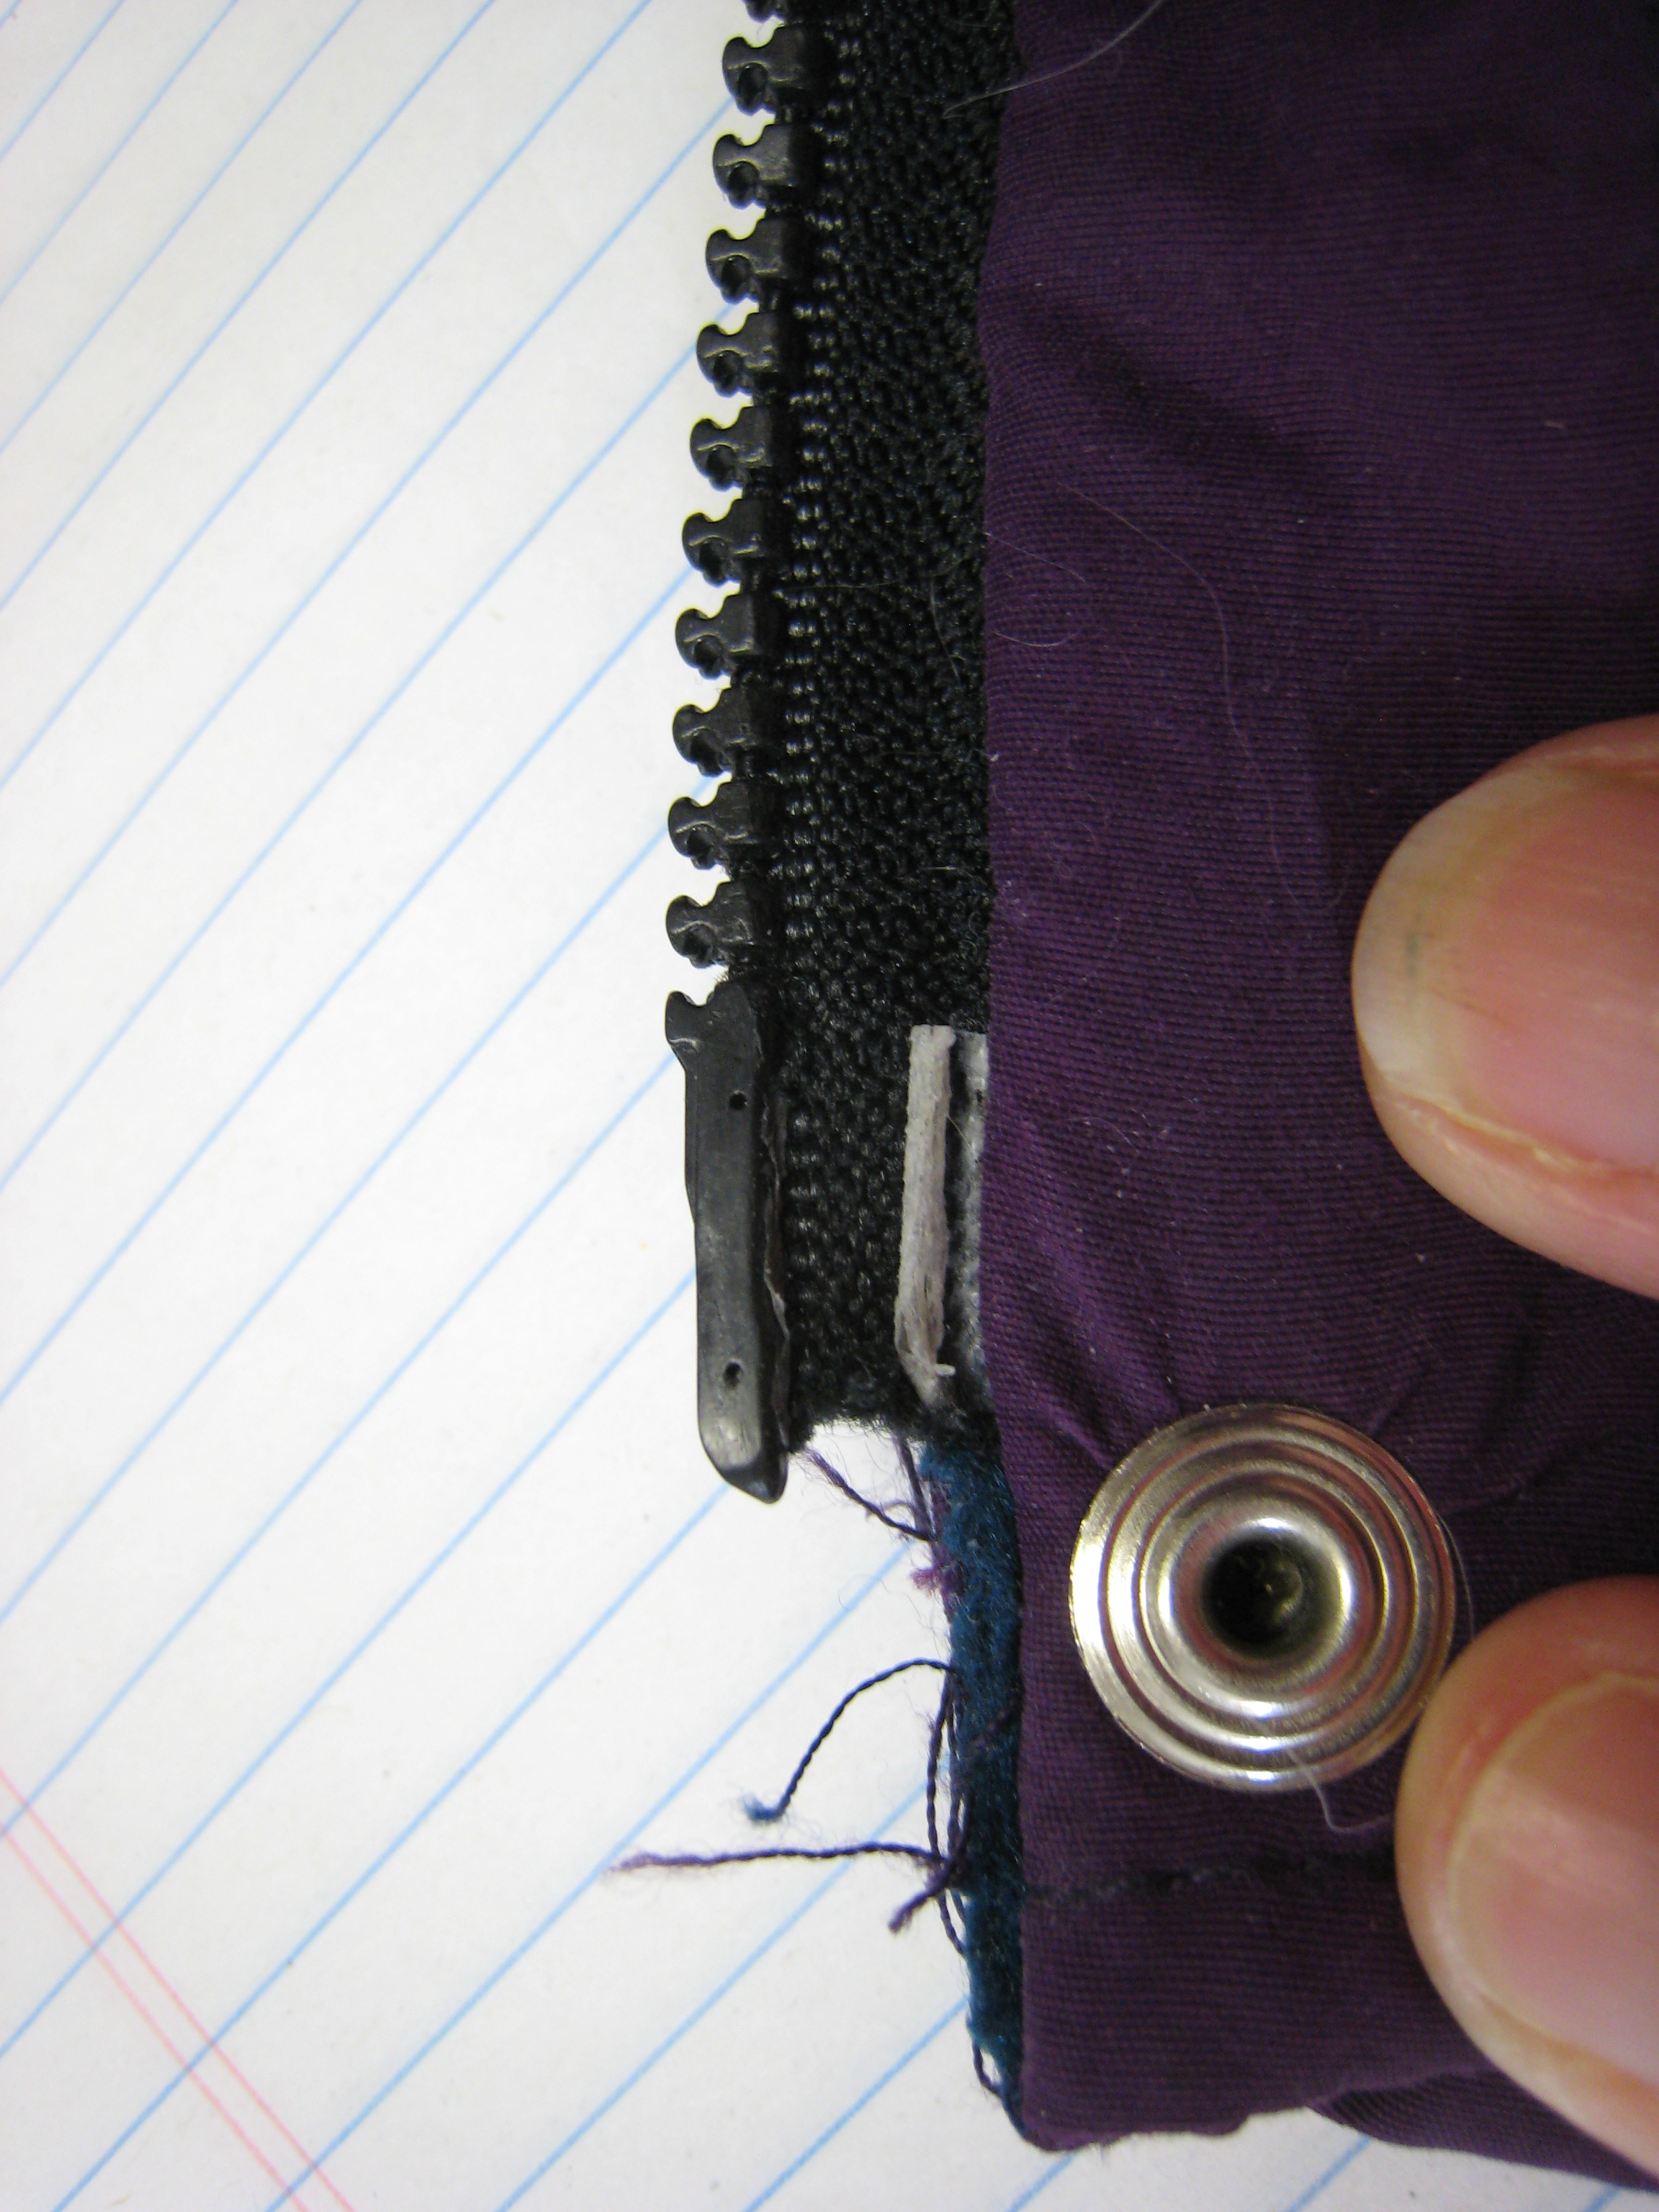 Common Zipper Problems | Specialty Outdoors